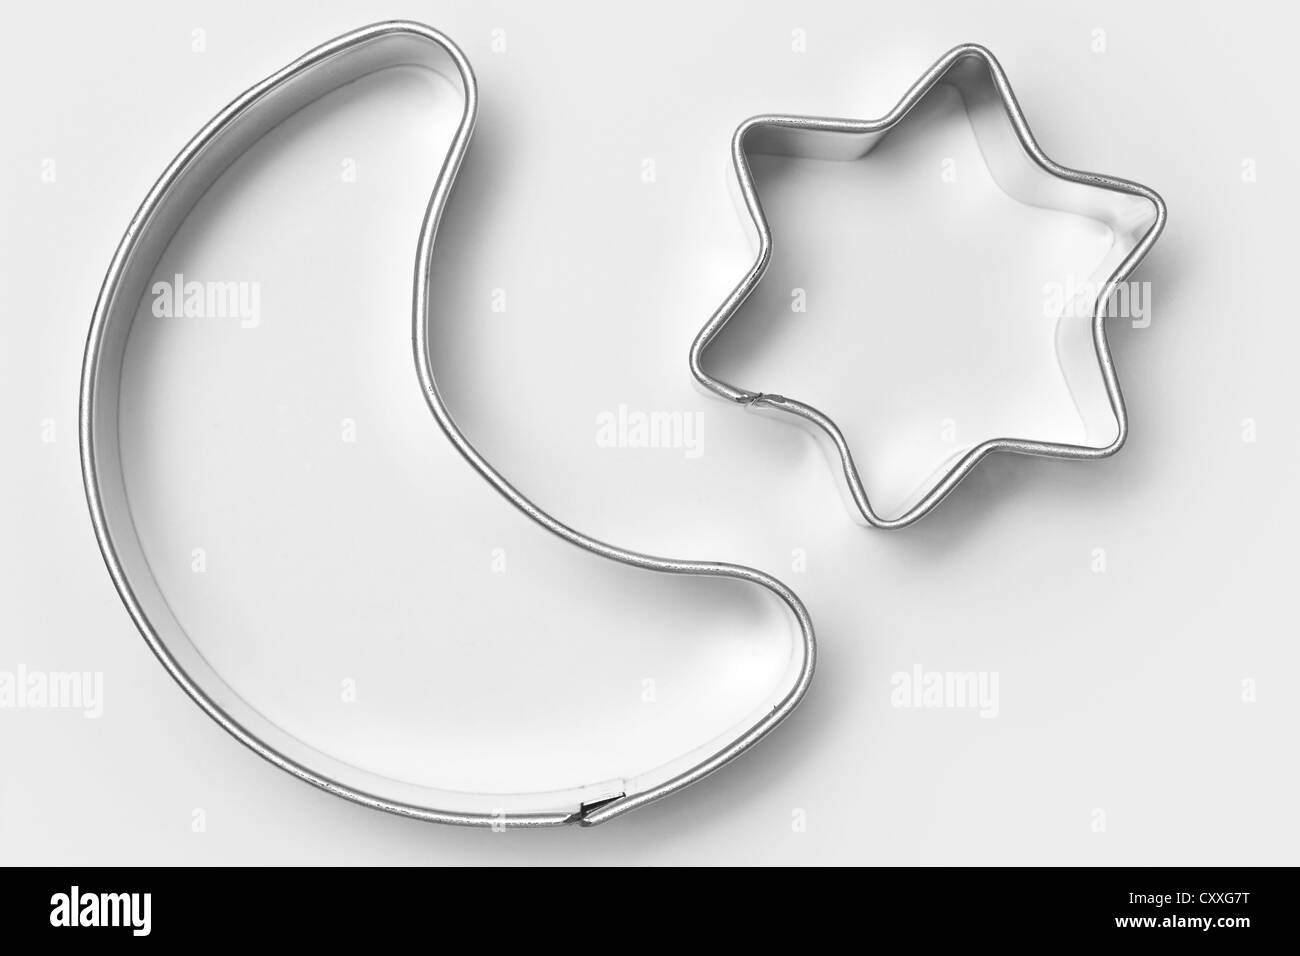 Moon and star-shaped cookie cutters for Christmas cookies Stock Photo